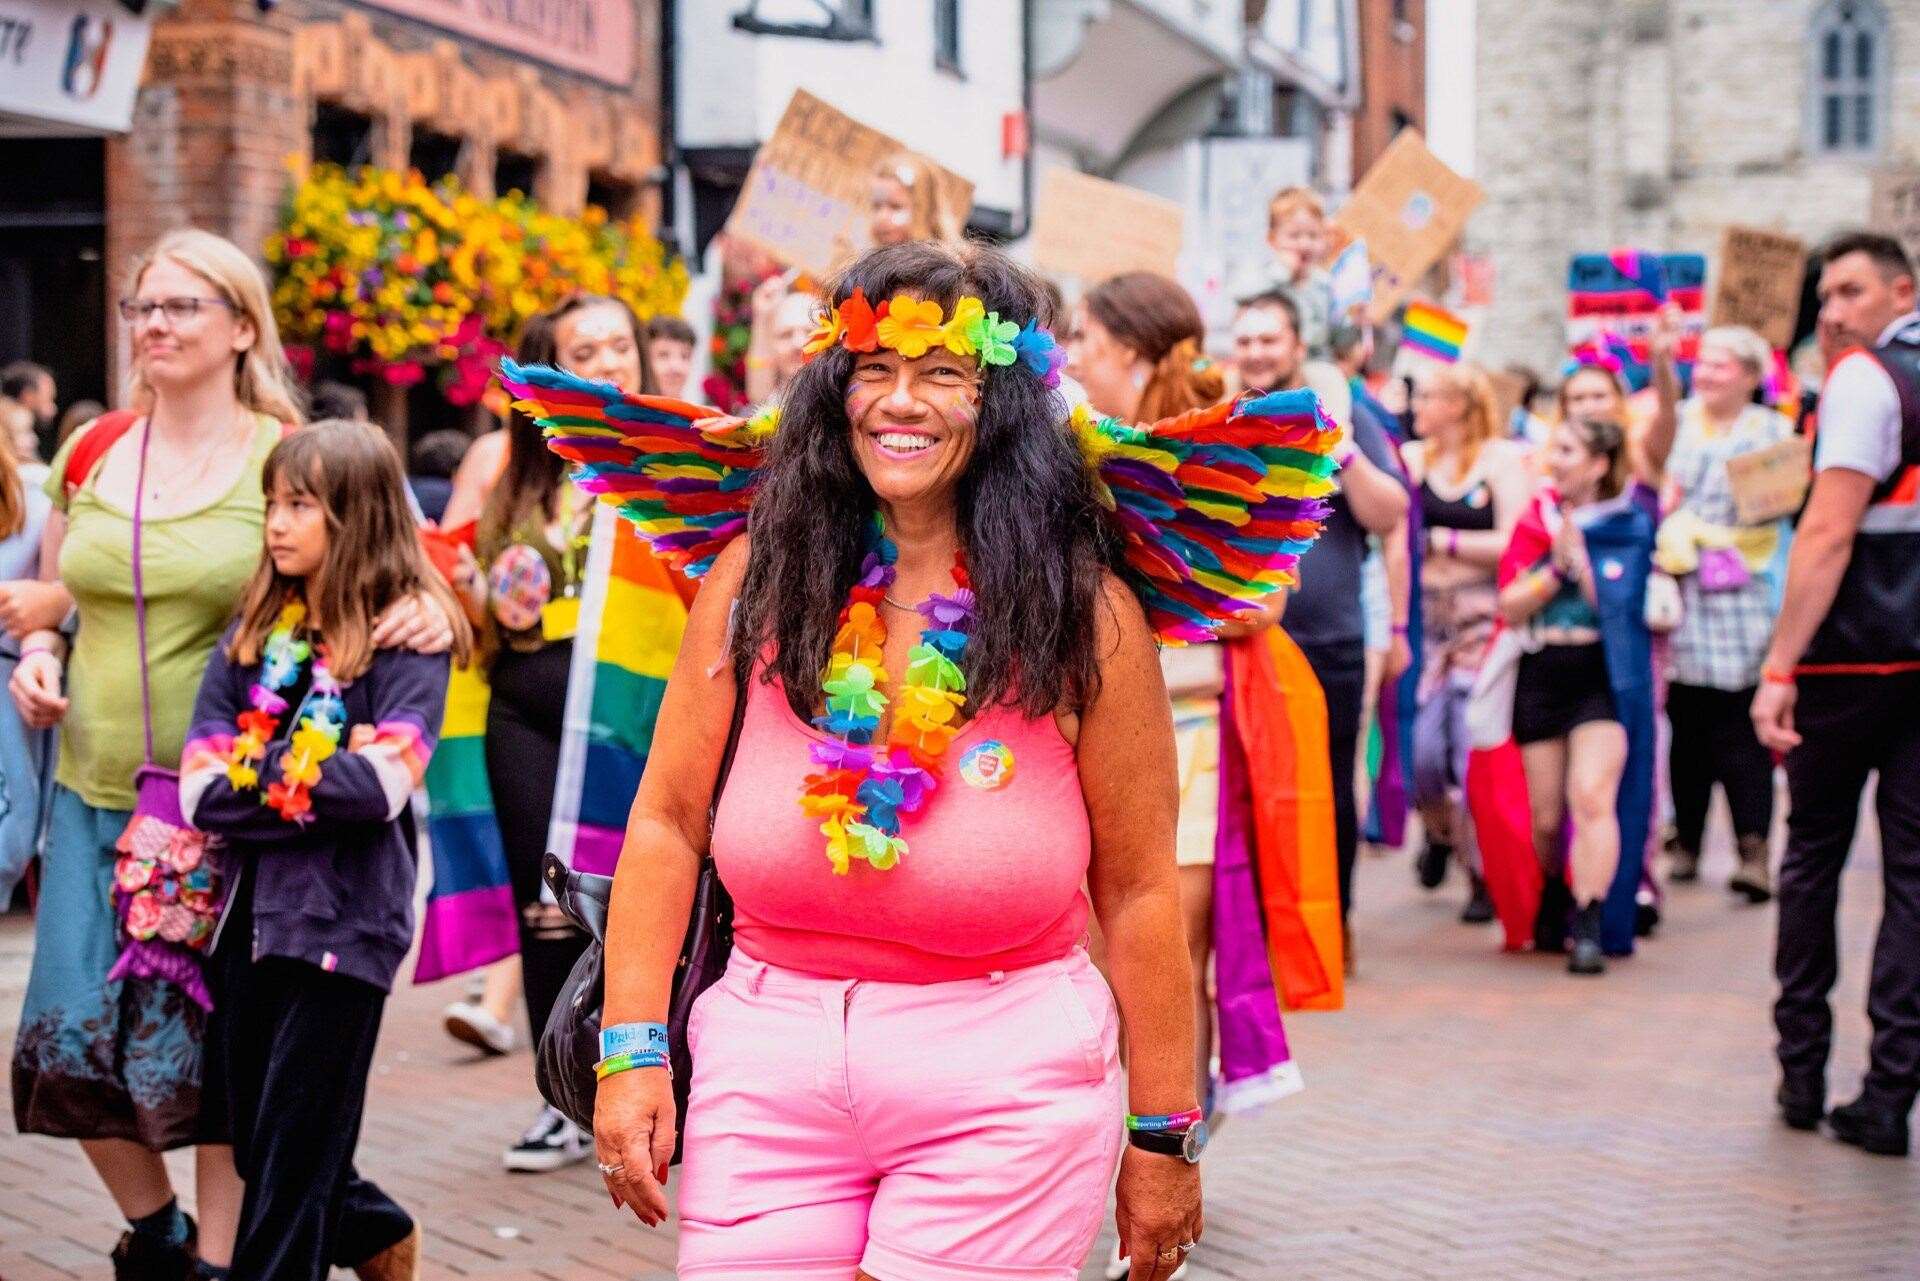 Canterbury Pride in Dane John Gardens: What’s new at this year’s festival?